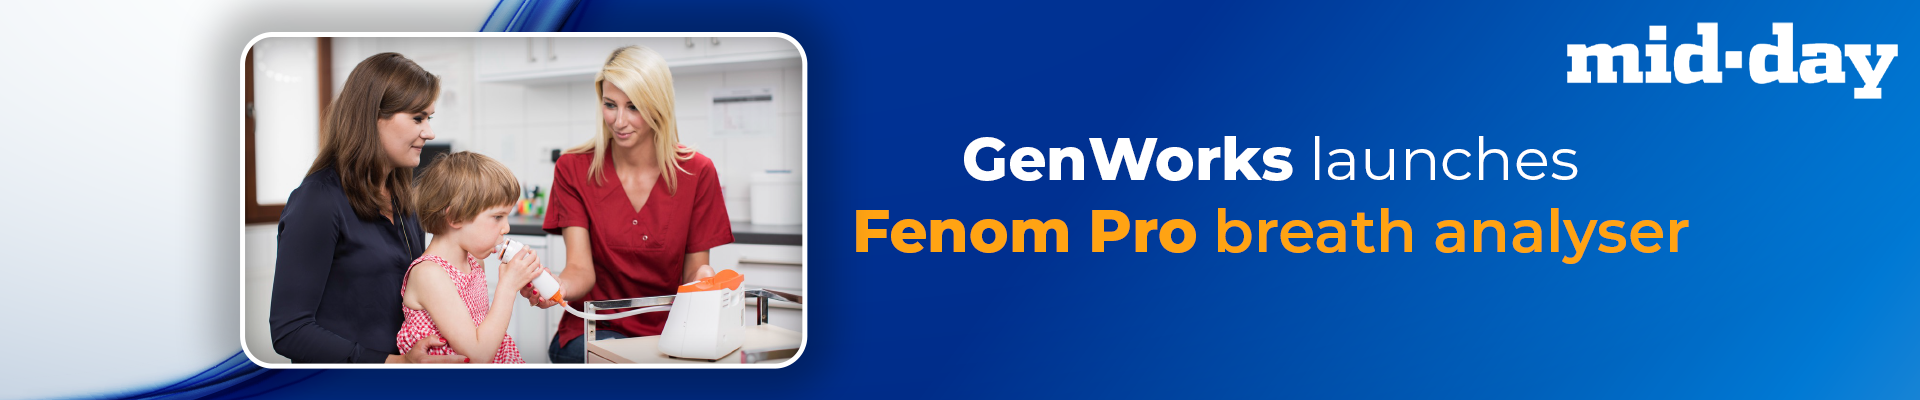 FenomPro Breath Analyser By GenWorks Makes Asthma Diagnosis and Screening Simple